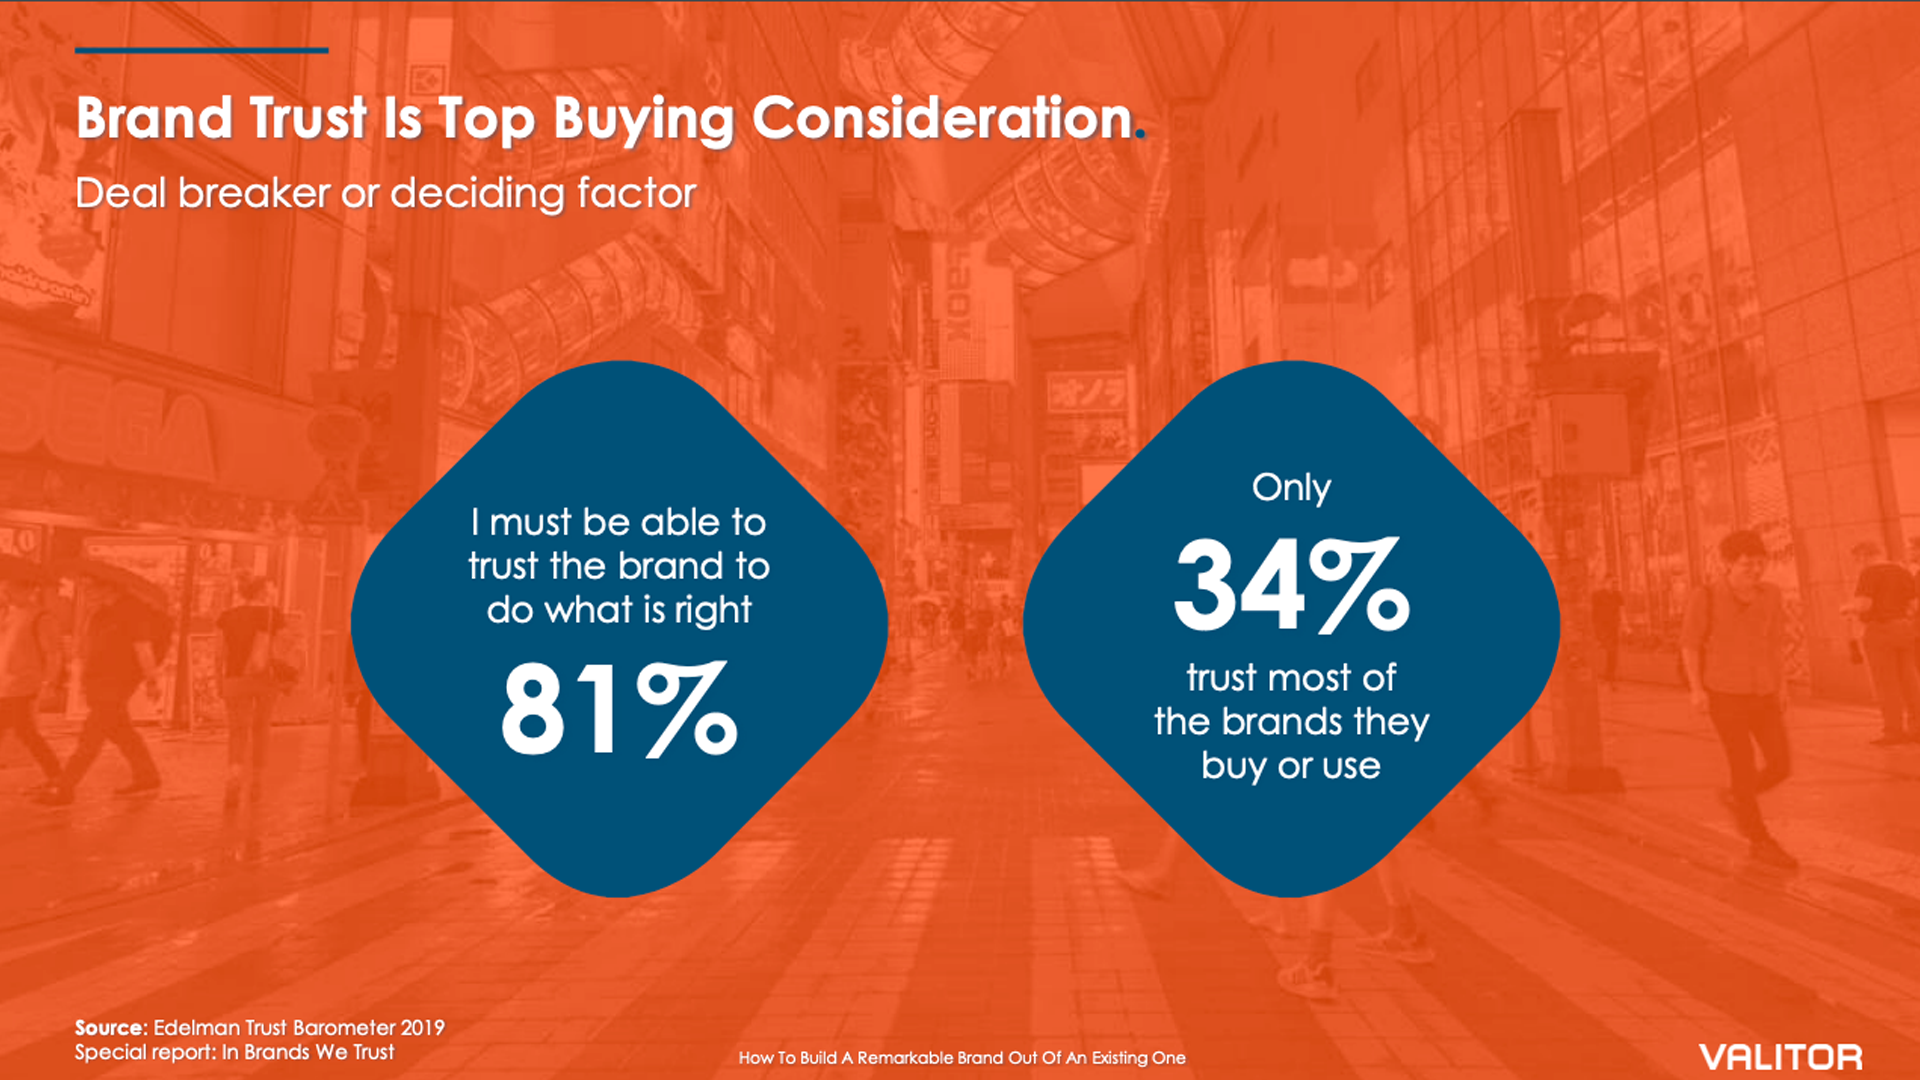 Valitor slide - brand trust is a top buying consideration. Only 34% of customer trust most of the brands they buy or use. 